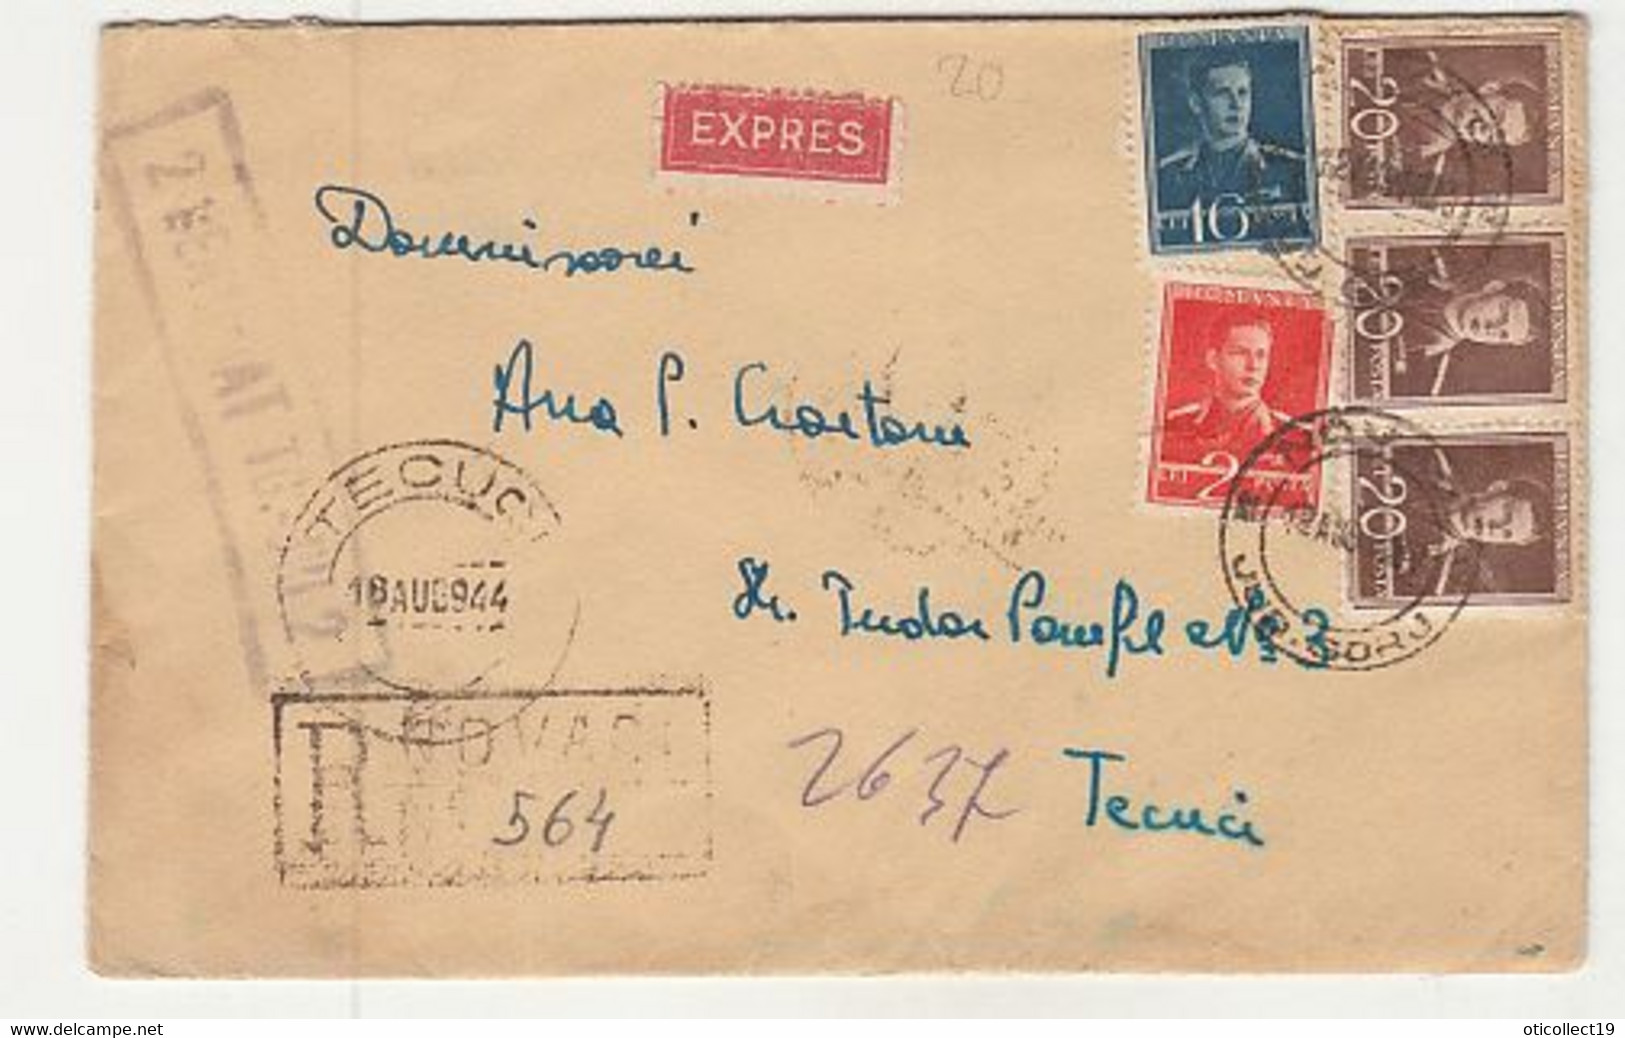 WW2 LETTER, CENSORED TARGU JIU NR 2, KING MICHAEL STAMPS ON REGISTERED COVER, 1944, ROMANIA - 2. Weltkrieg (Briefe)